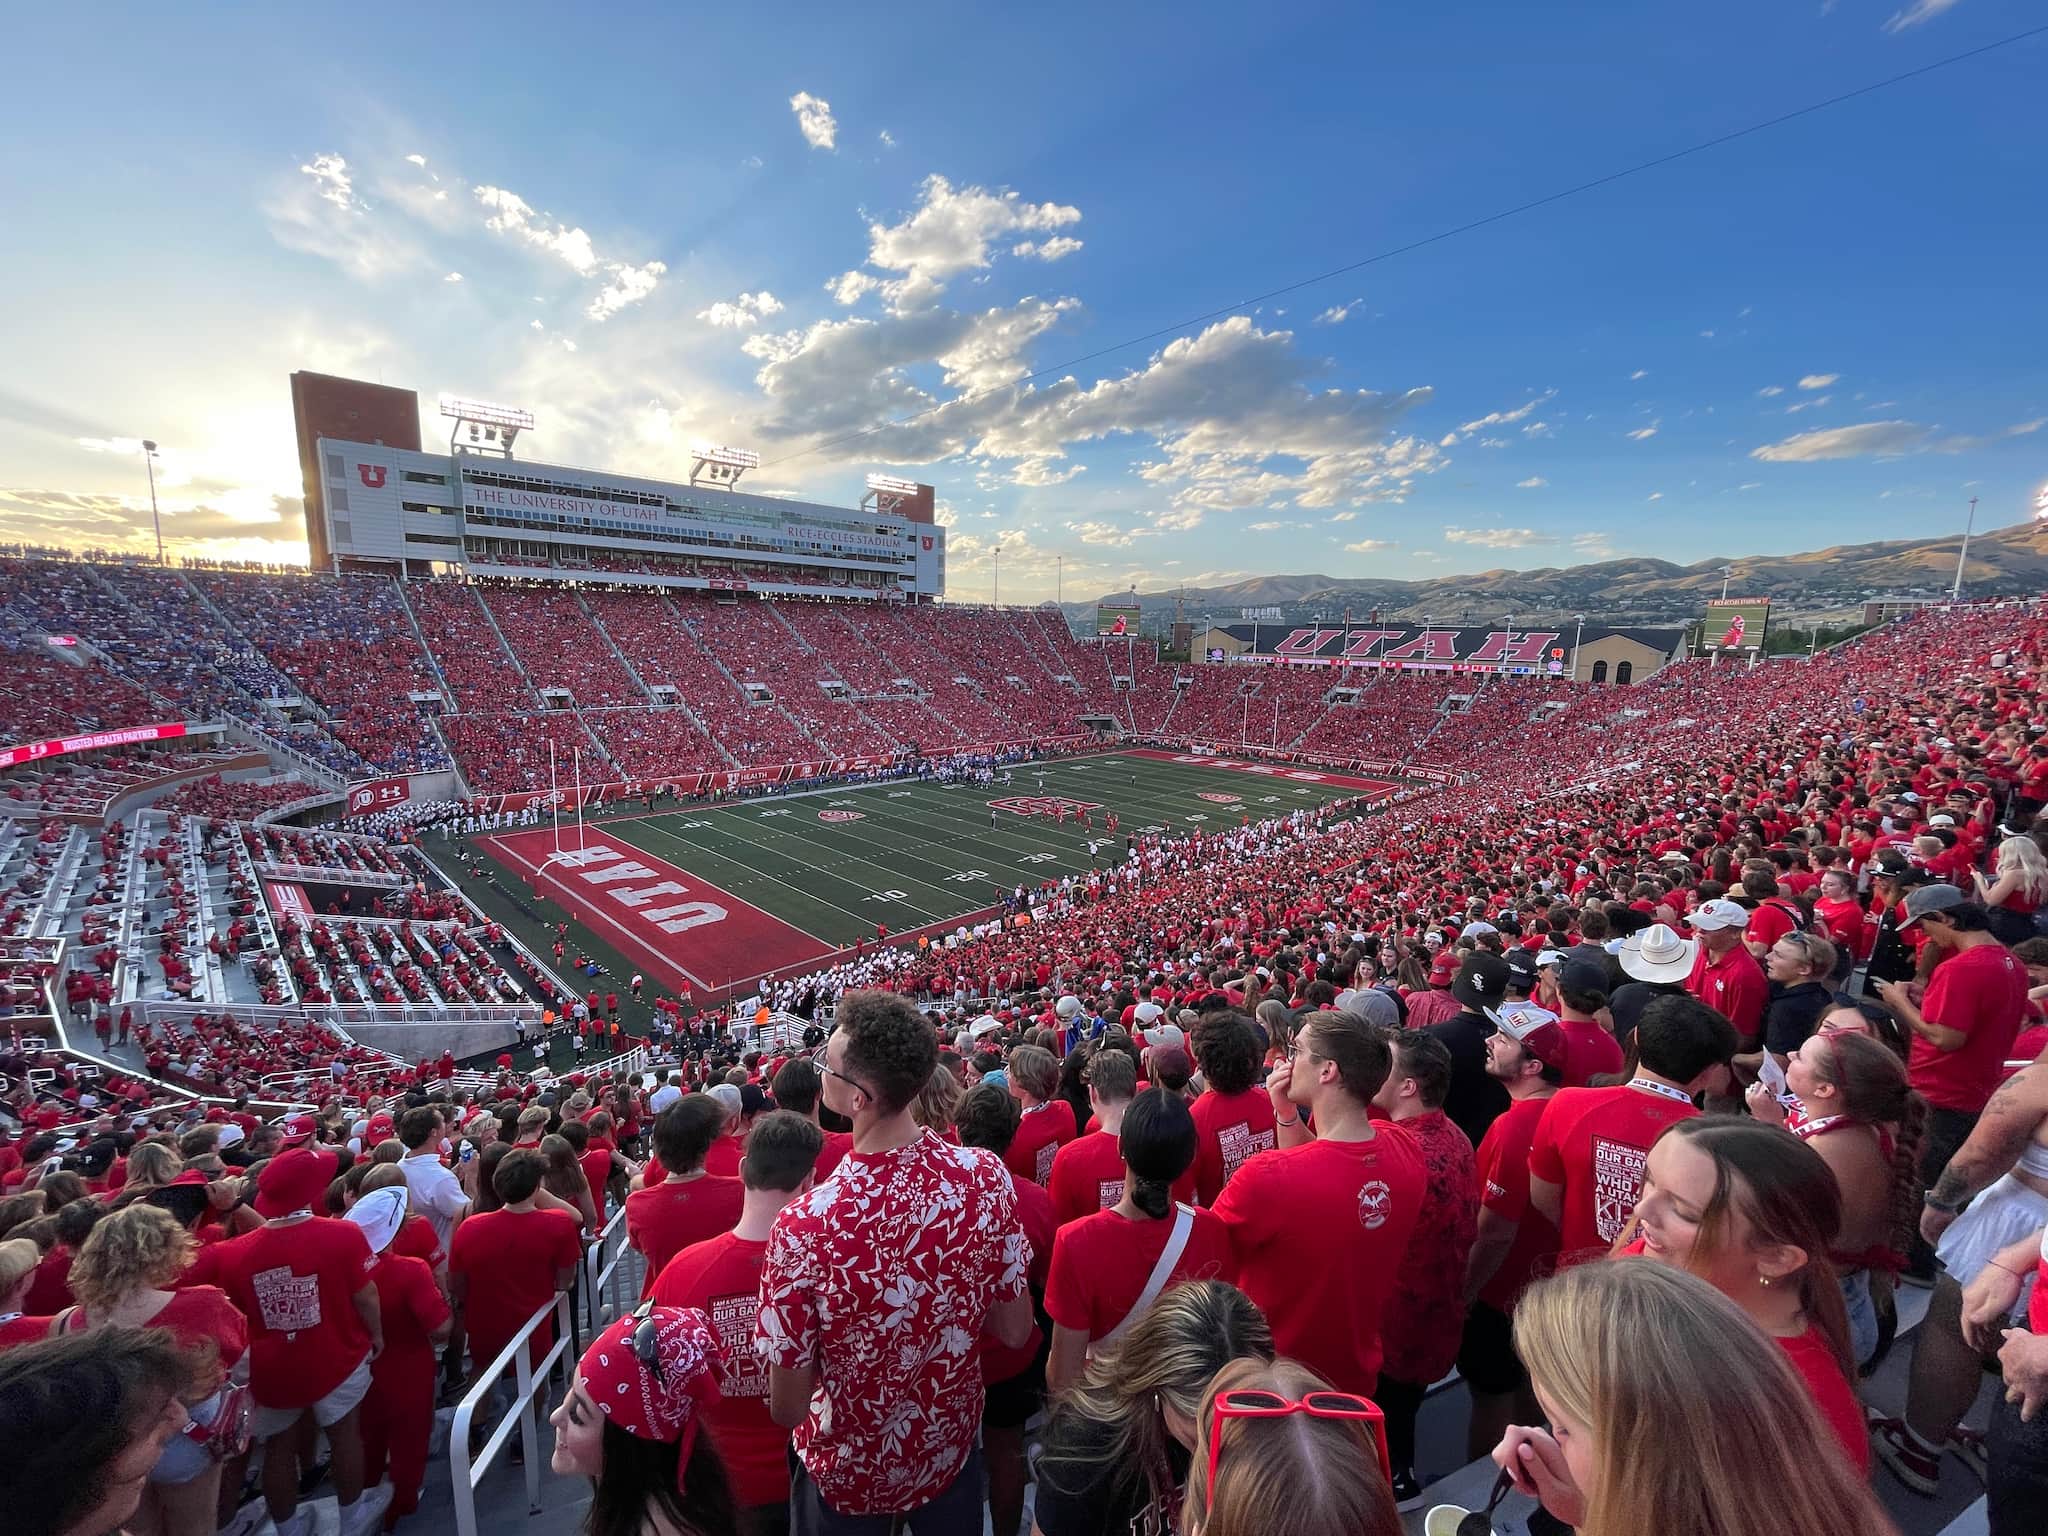 Sold-out crowd at Rice Eccles Stadium